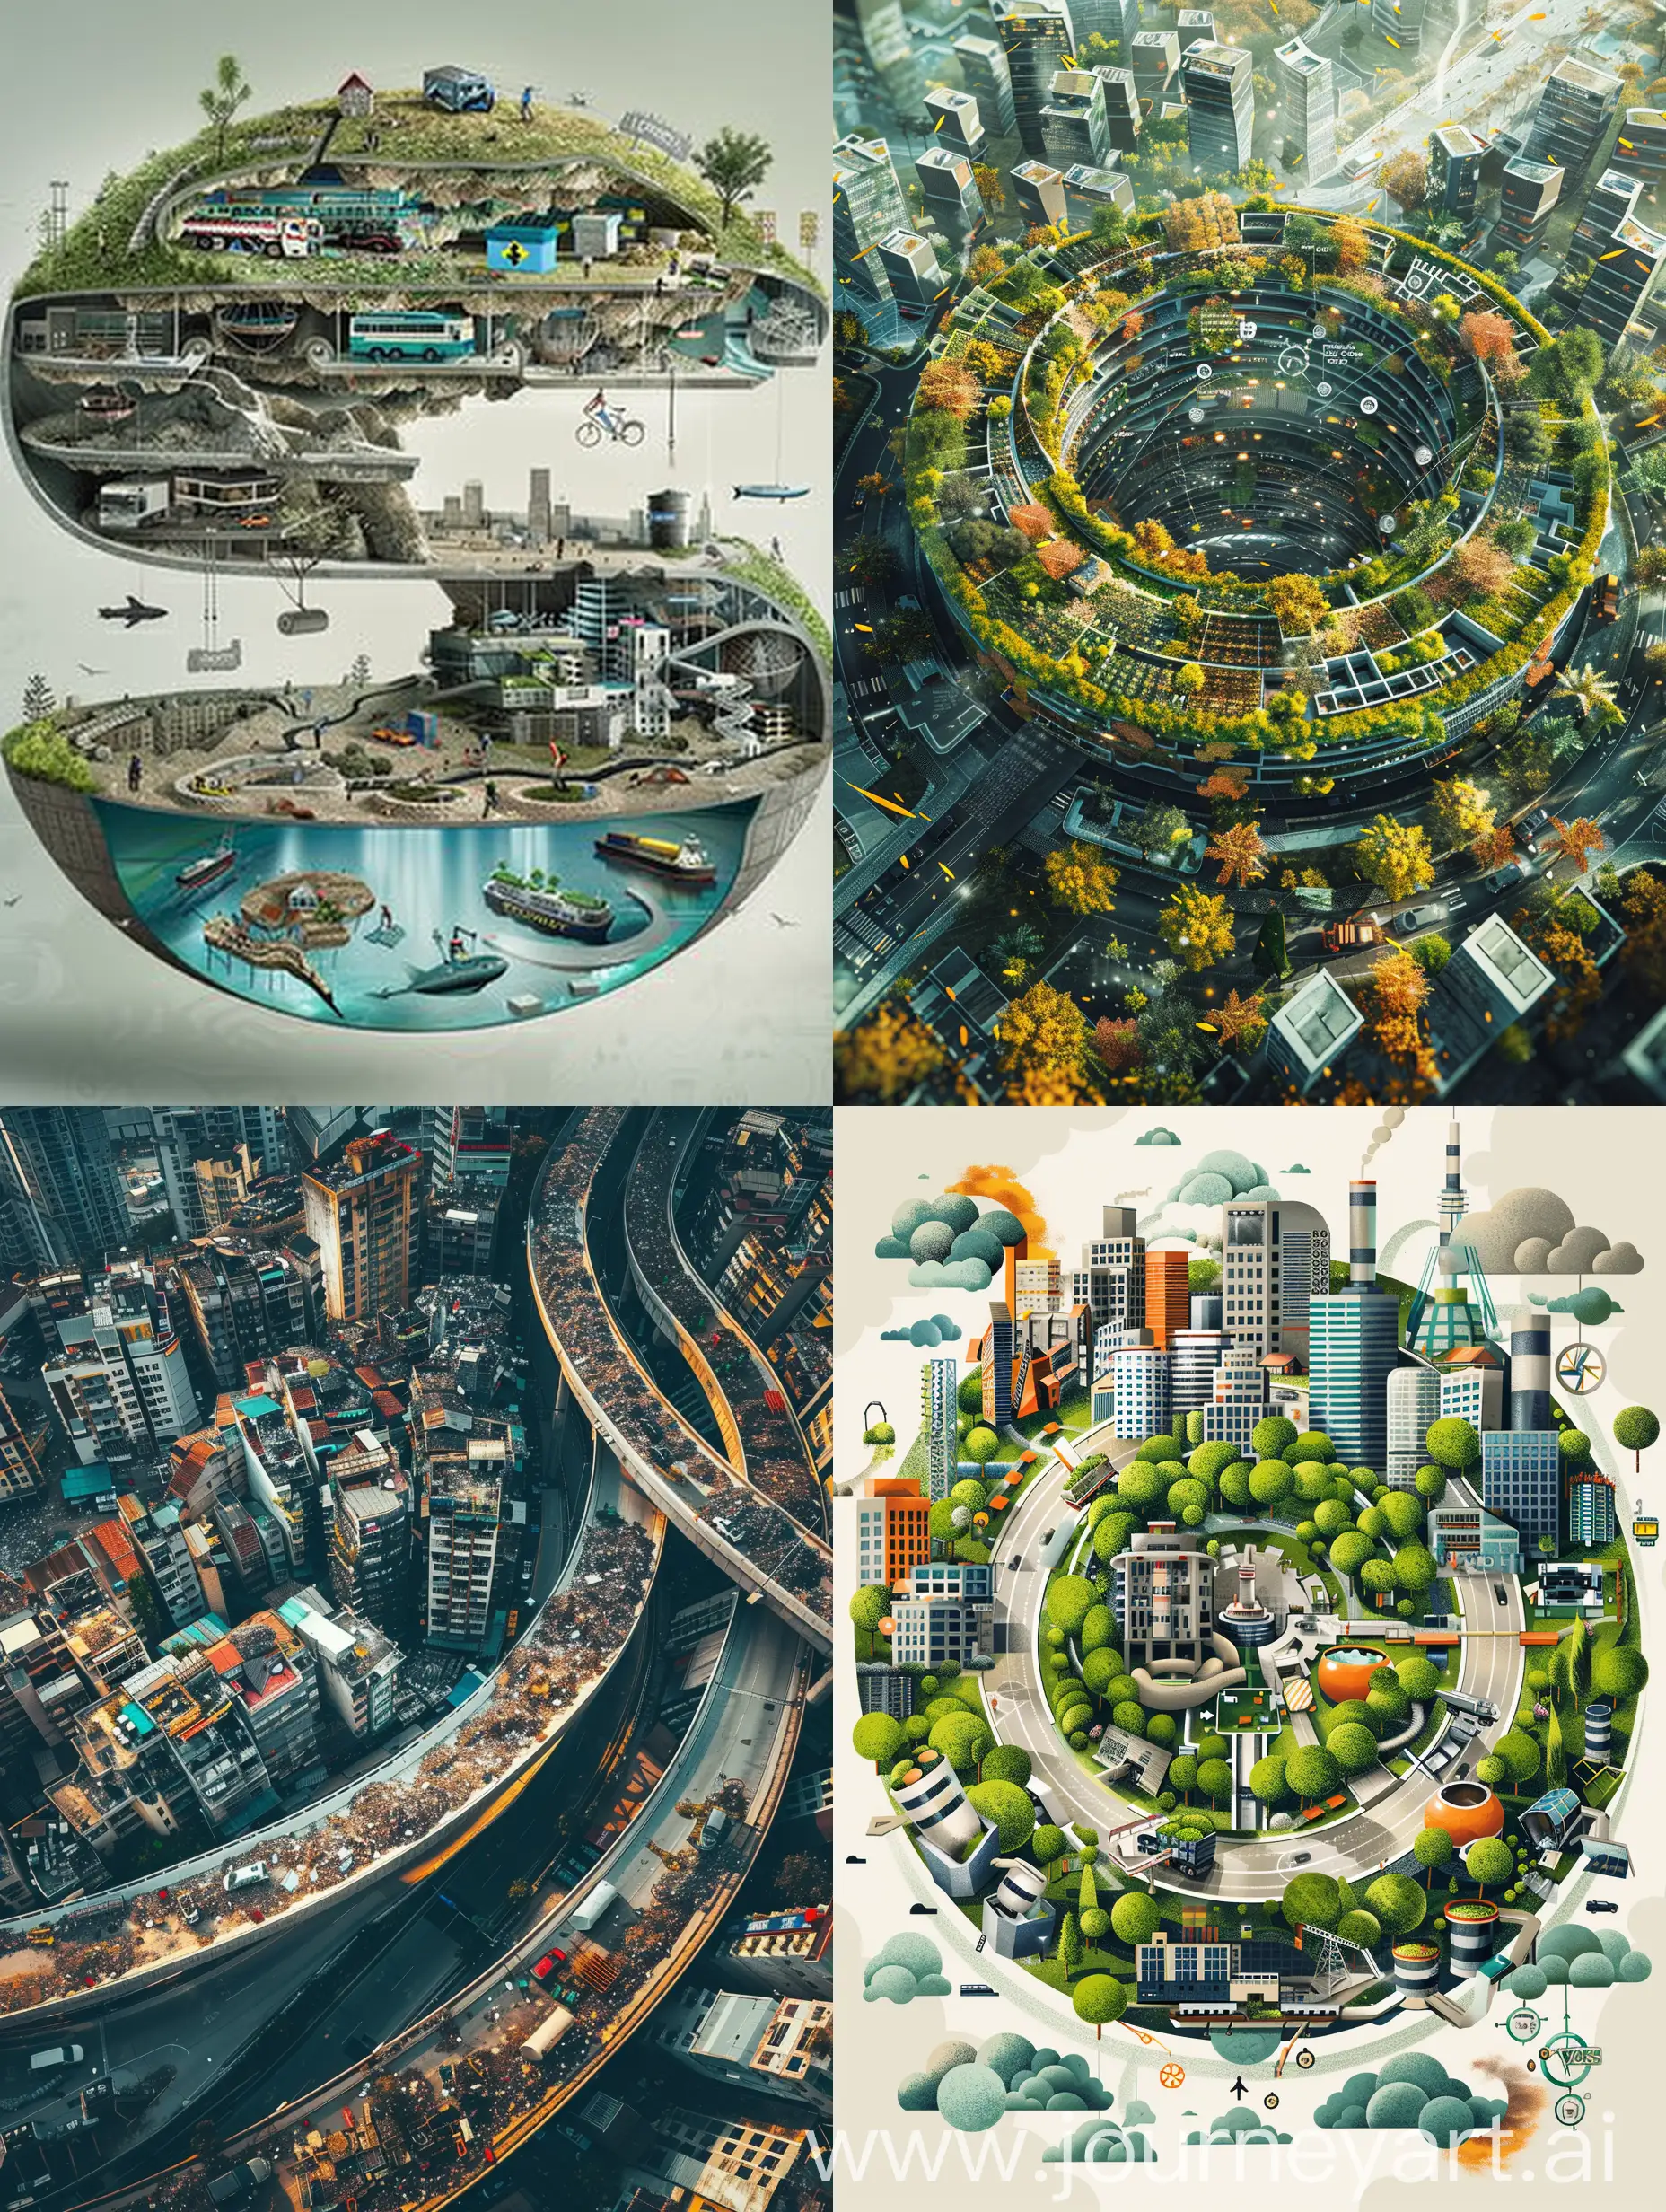 could you please create for me an image of the circular economy, how it manifests itself and how it can influence the system of activities carried out within the urban organization